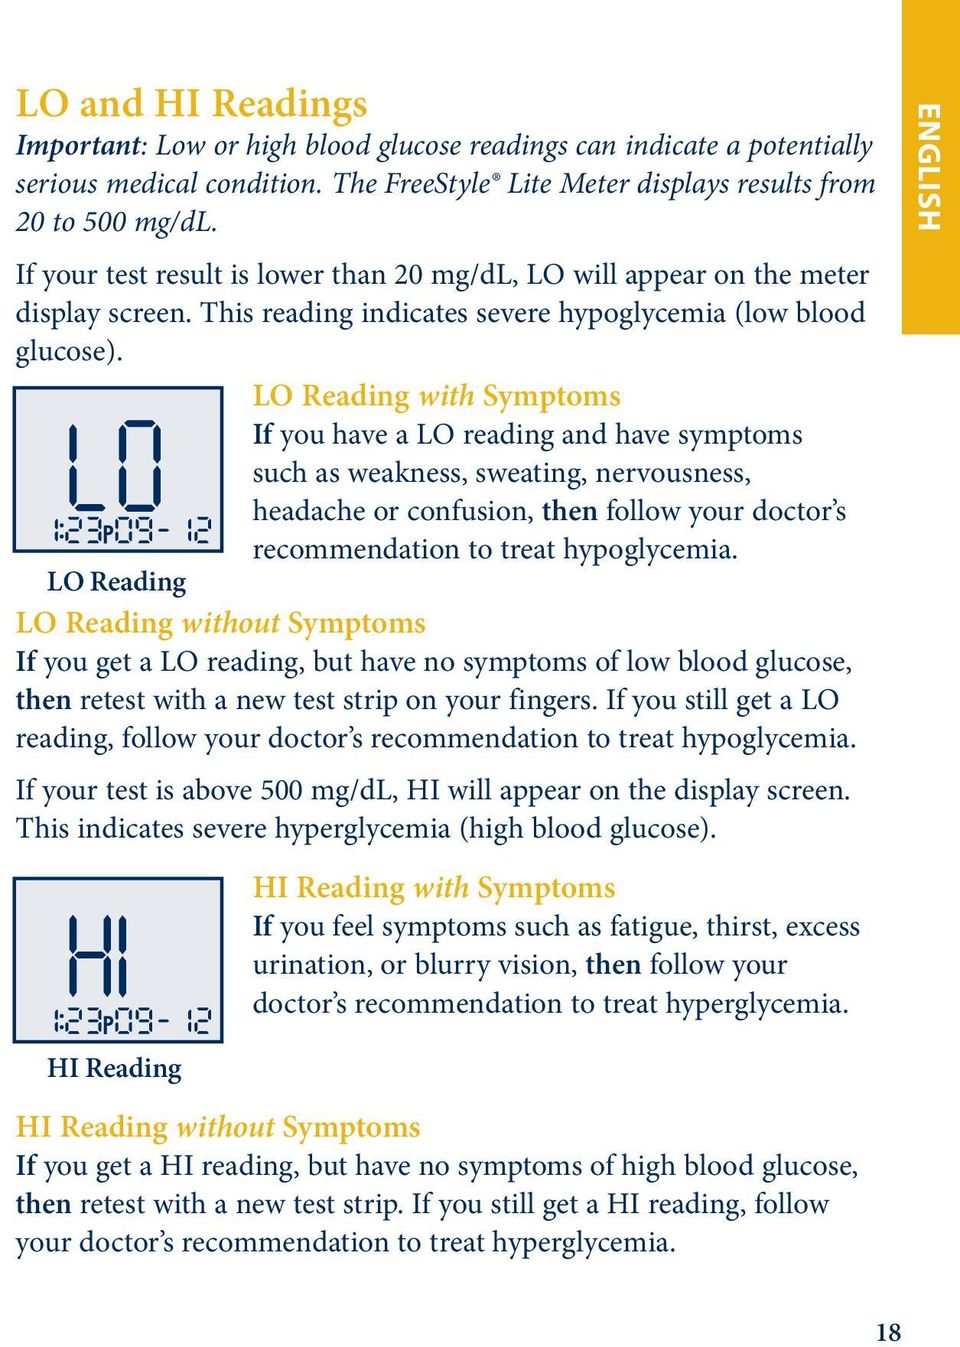 LO Reading with Symptoms If you have a LO reading and have symptoms such as weakness, sweating, nervousness, headache or confusion, then follow your doctor s recommendation to treat hypoglycemia.